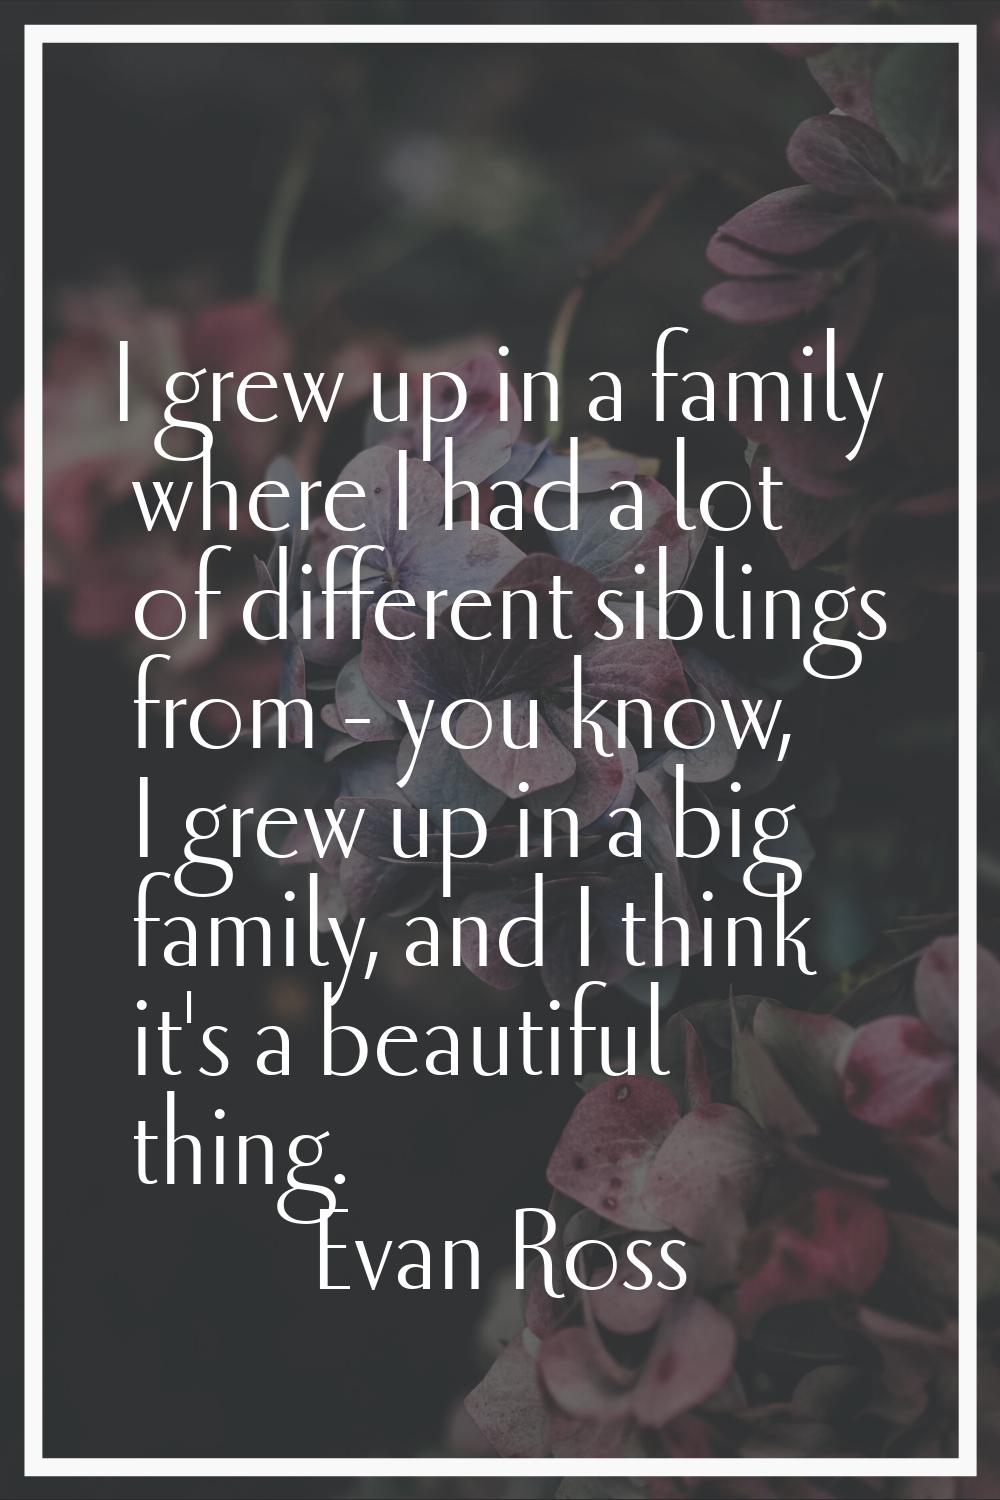 I grew up in a family where I had a lot of different siblings from - you know, I grew up in a big f